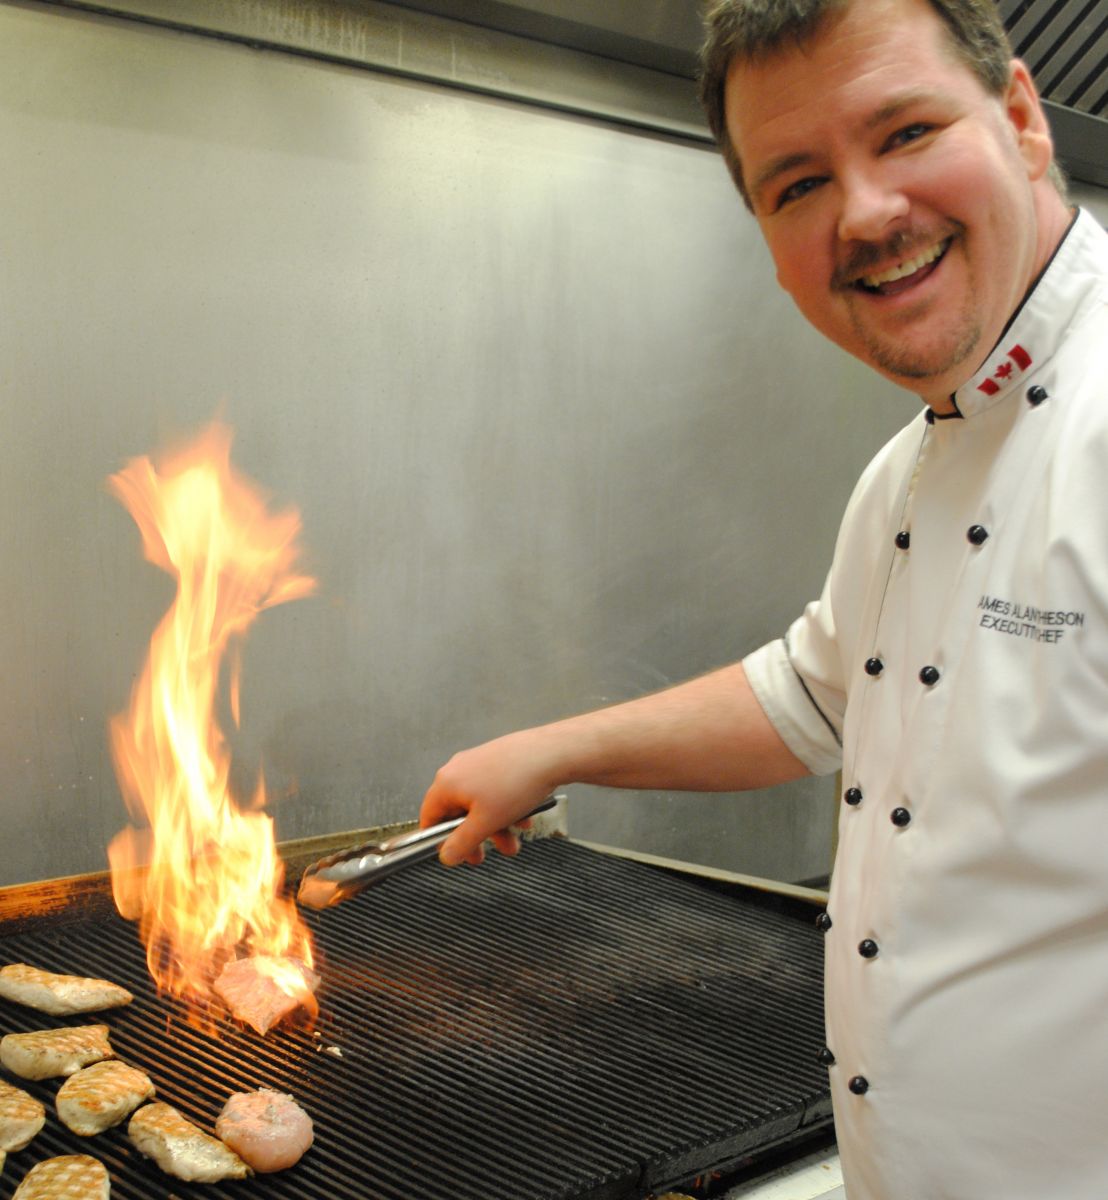 Leading the Food and Beverage team is Executive Chef, James Mathieson. 